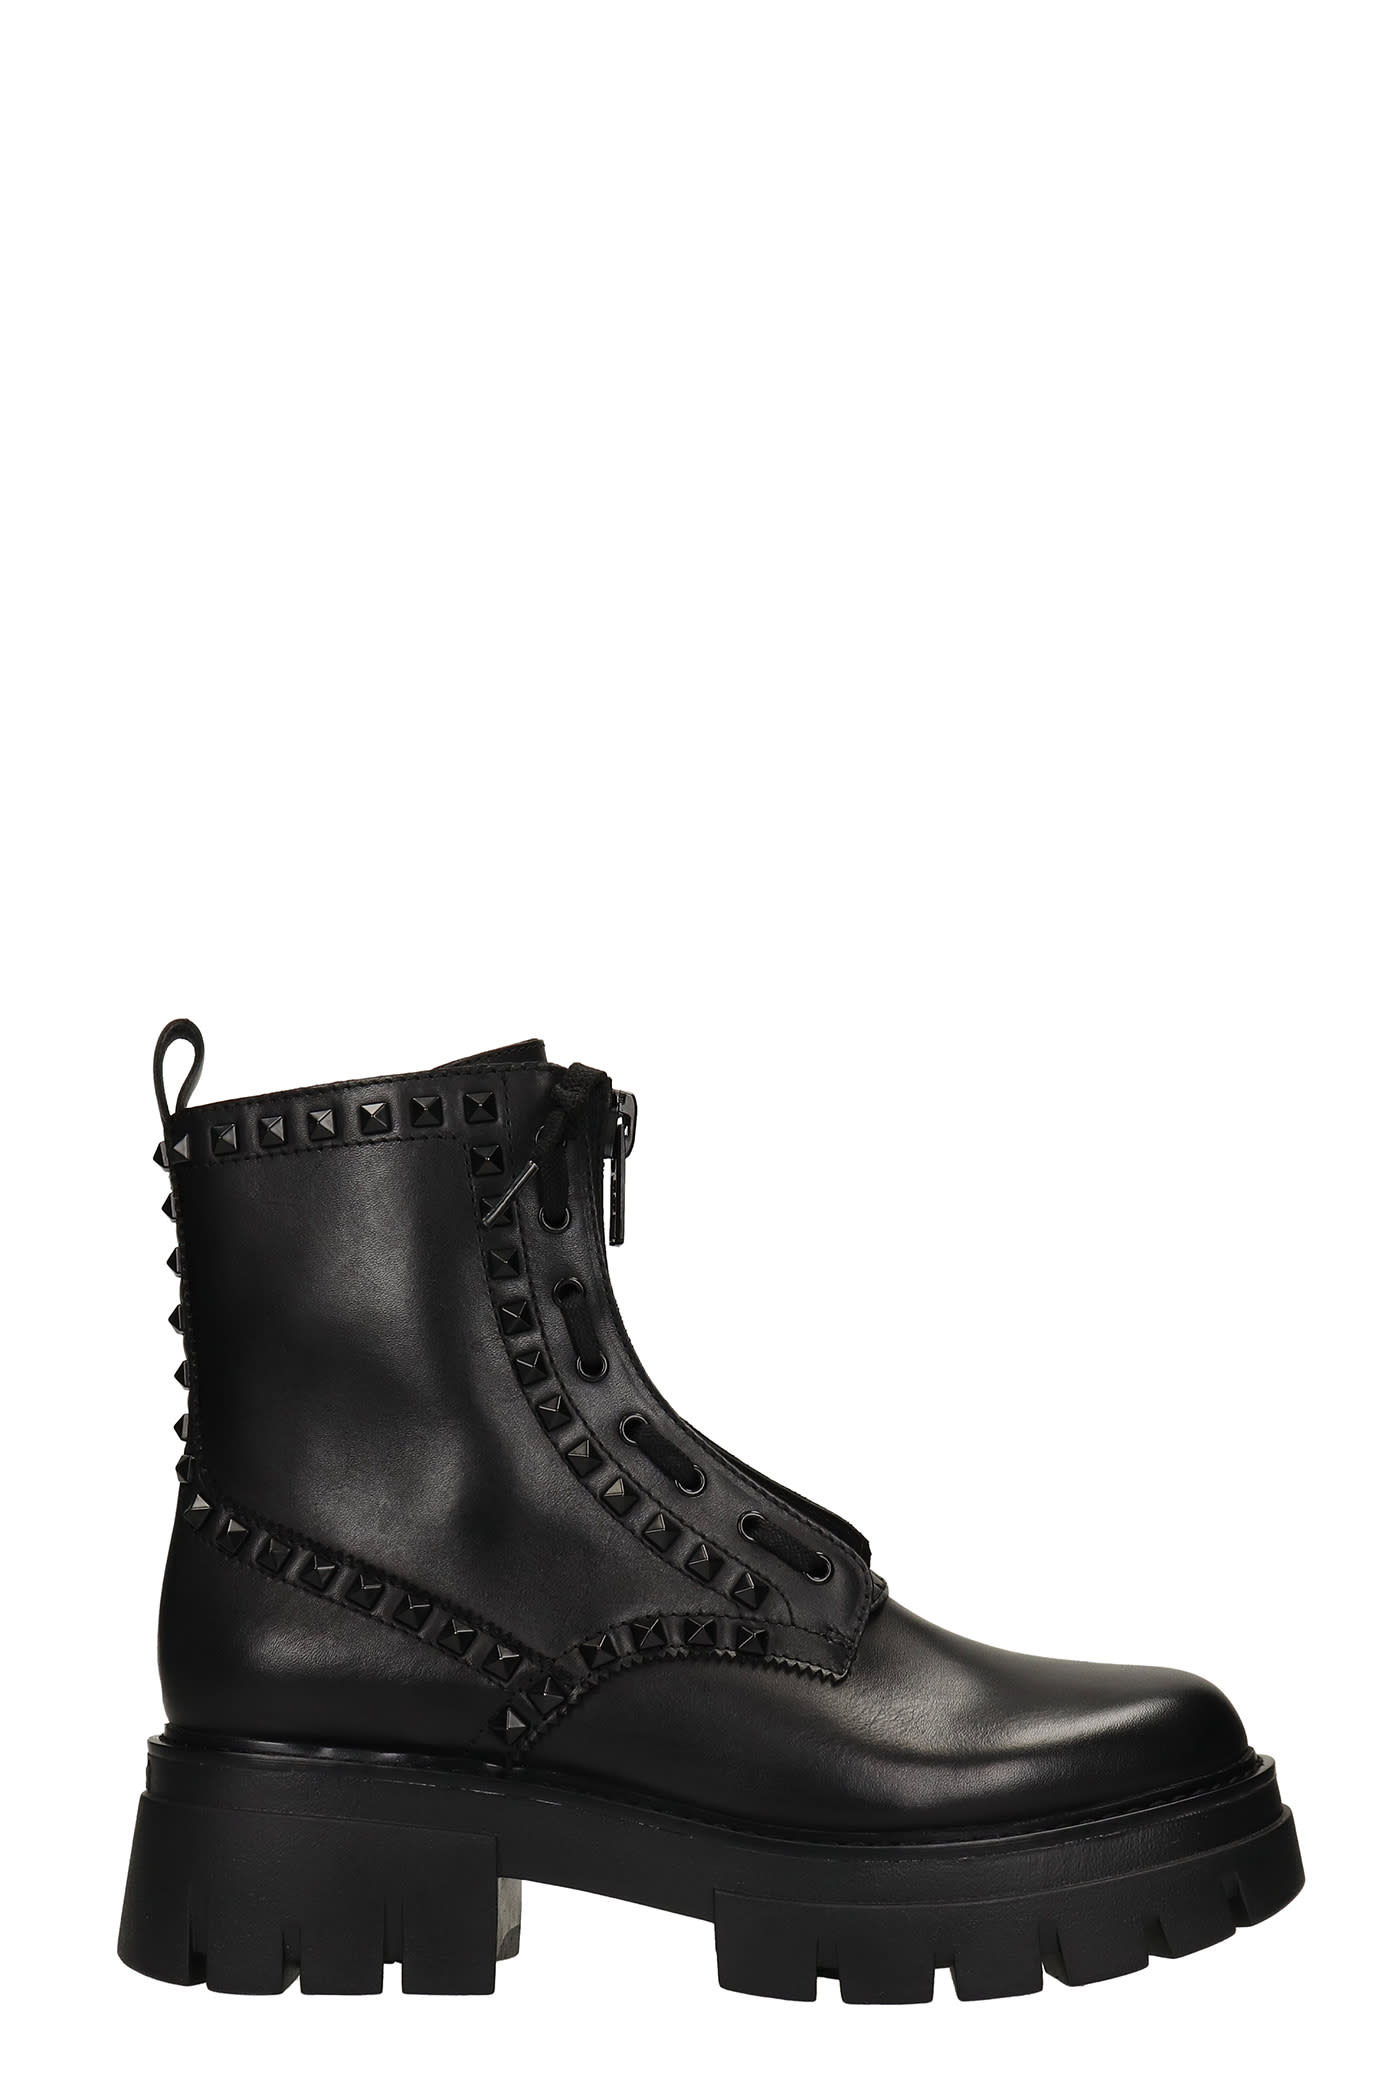 Ash Lynchstuds Combat Boots In Black Leather